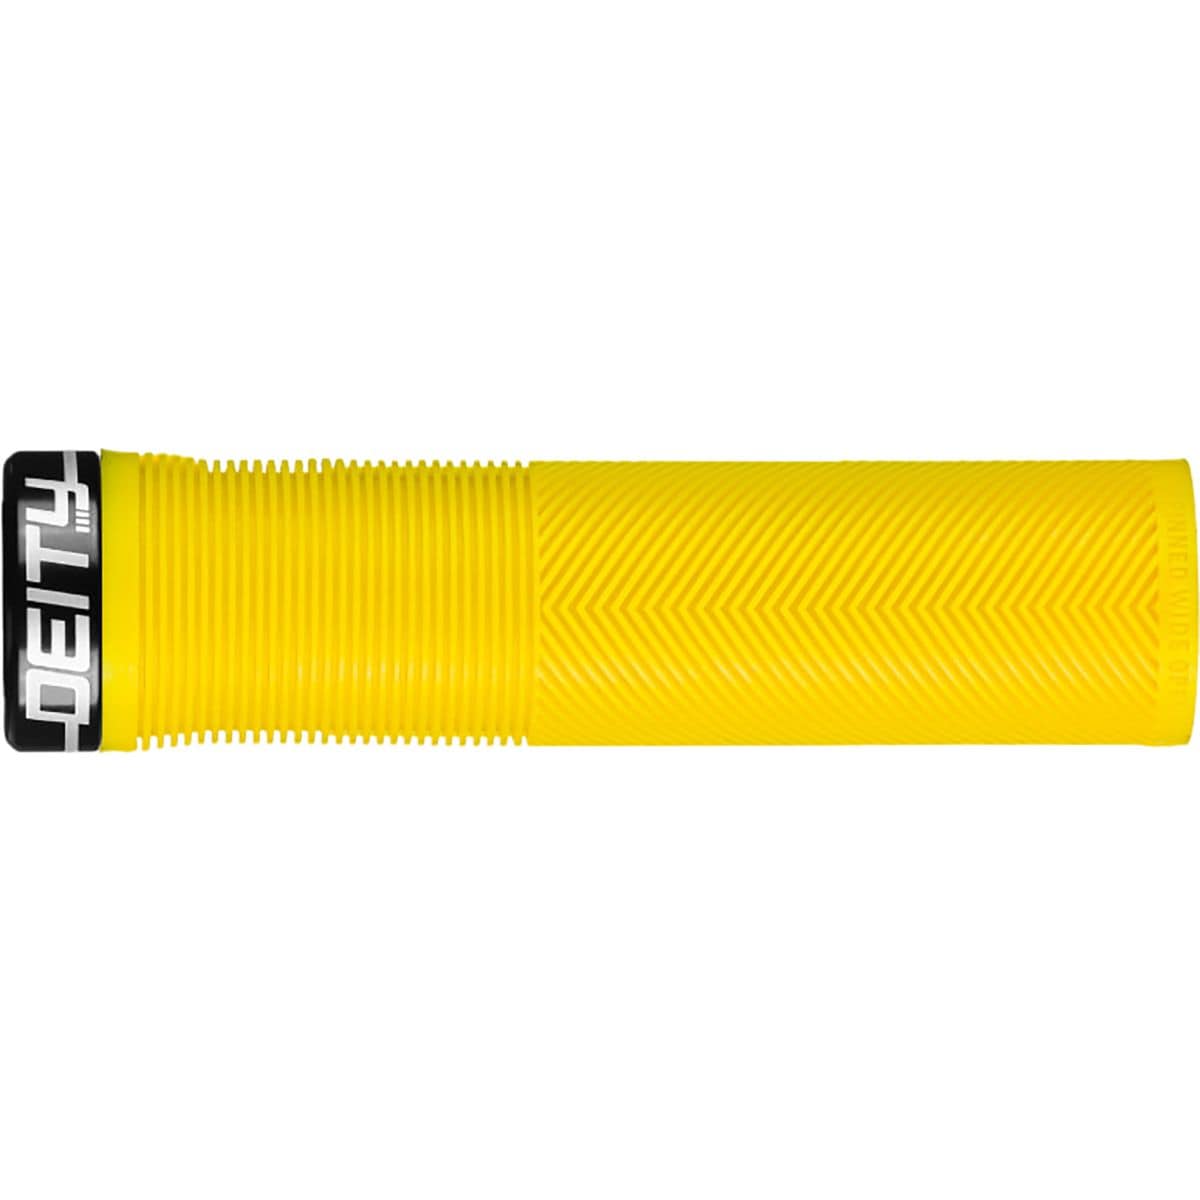 Deity Components Knuckleduster Grip Yellow, One Size